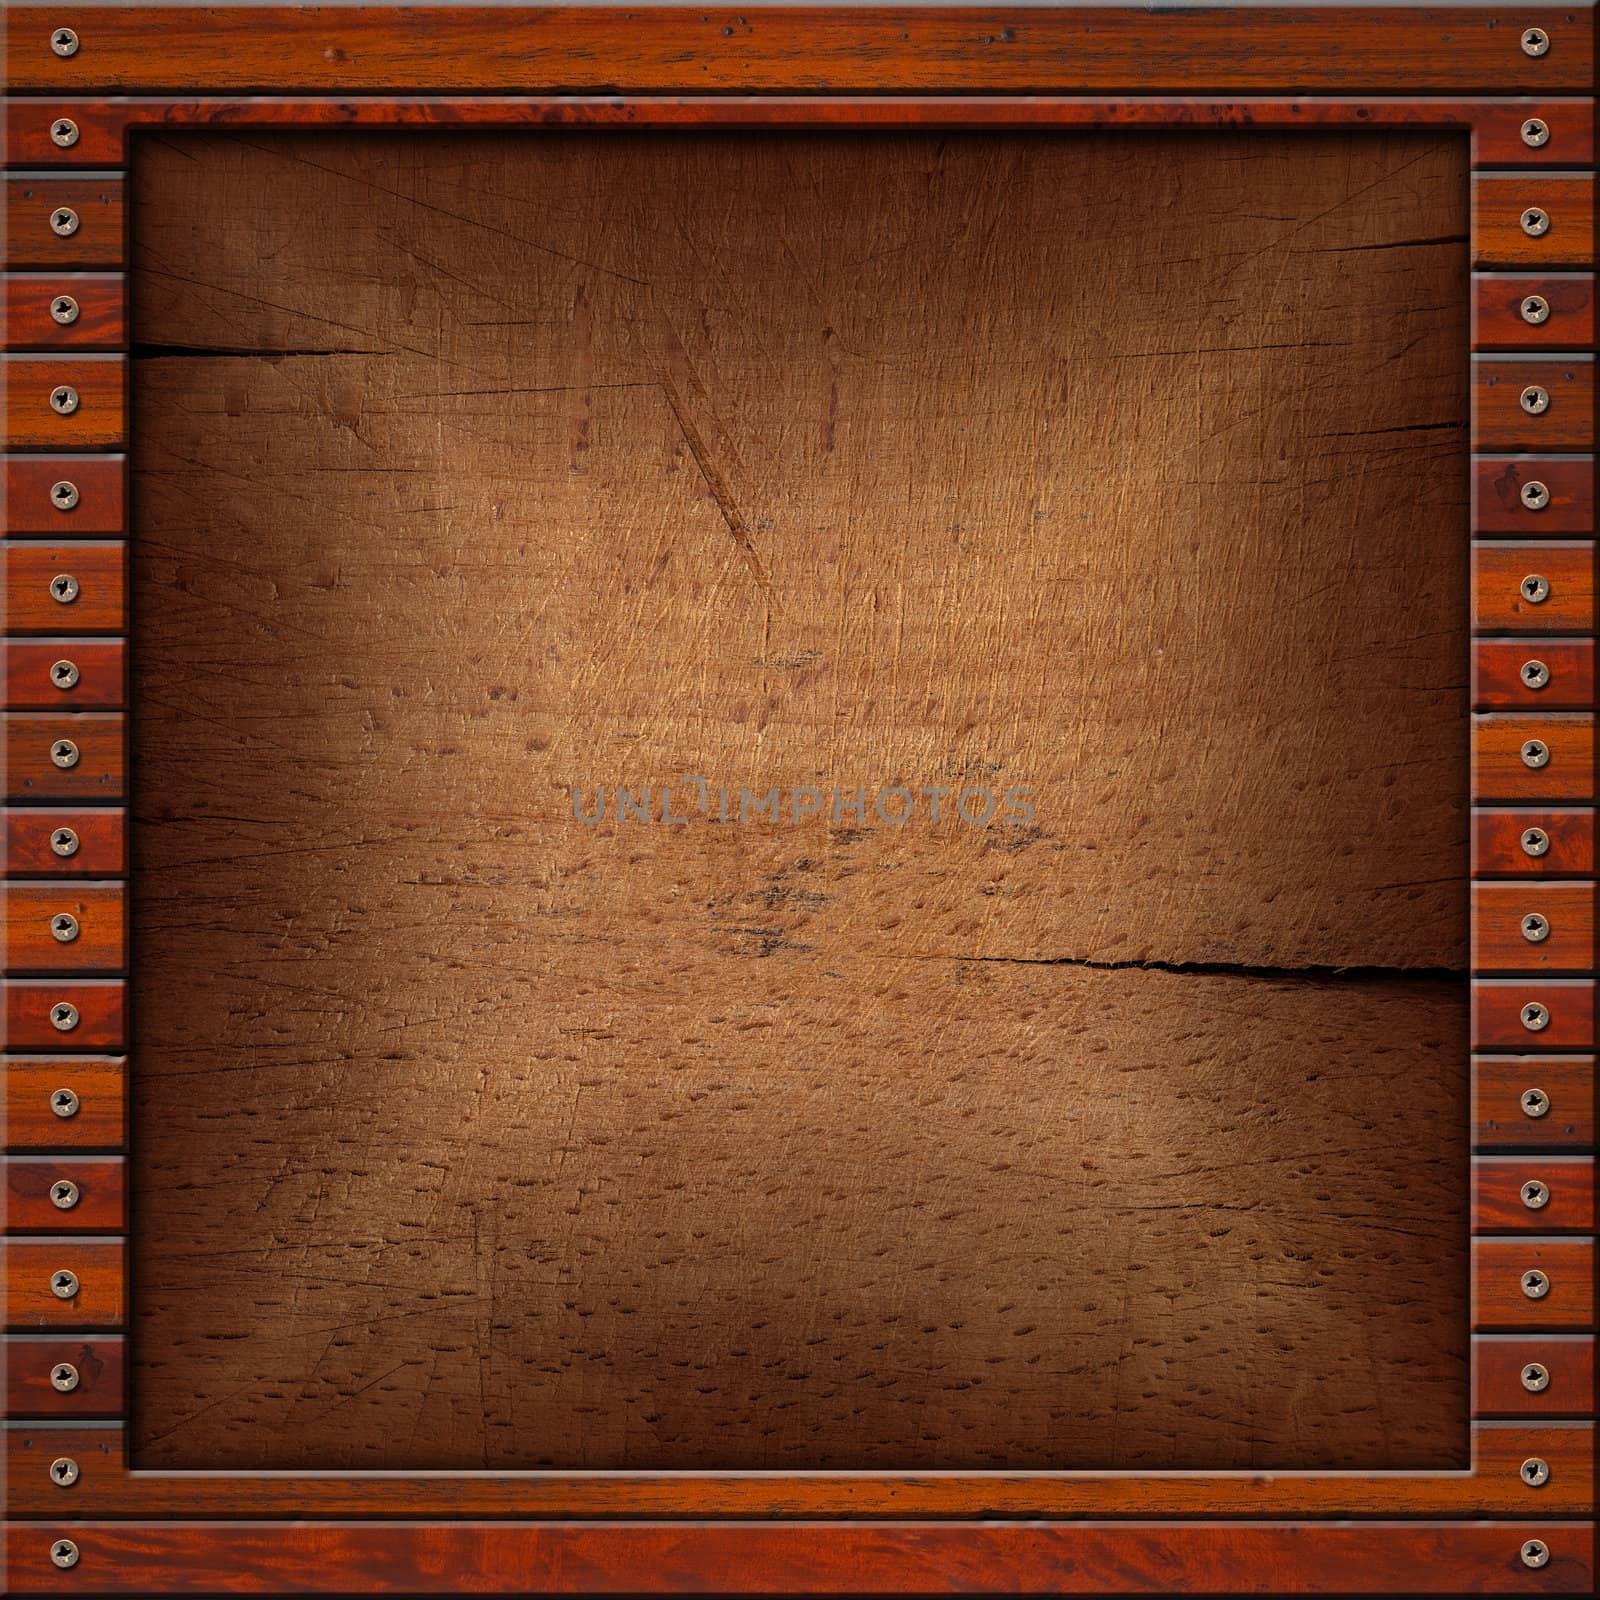 Square vintage frame on wood for background or text
